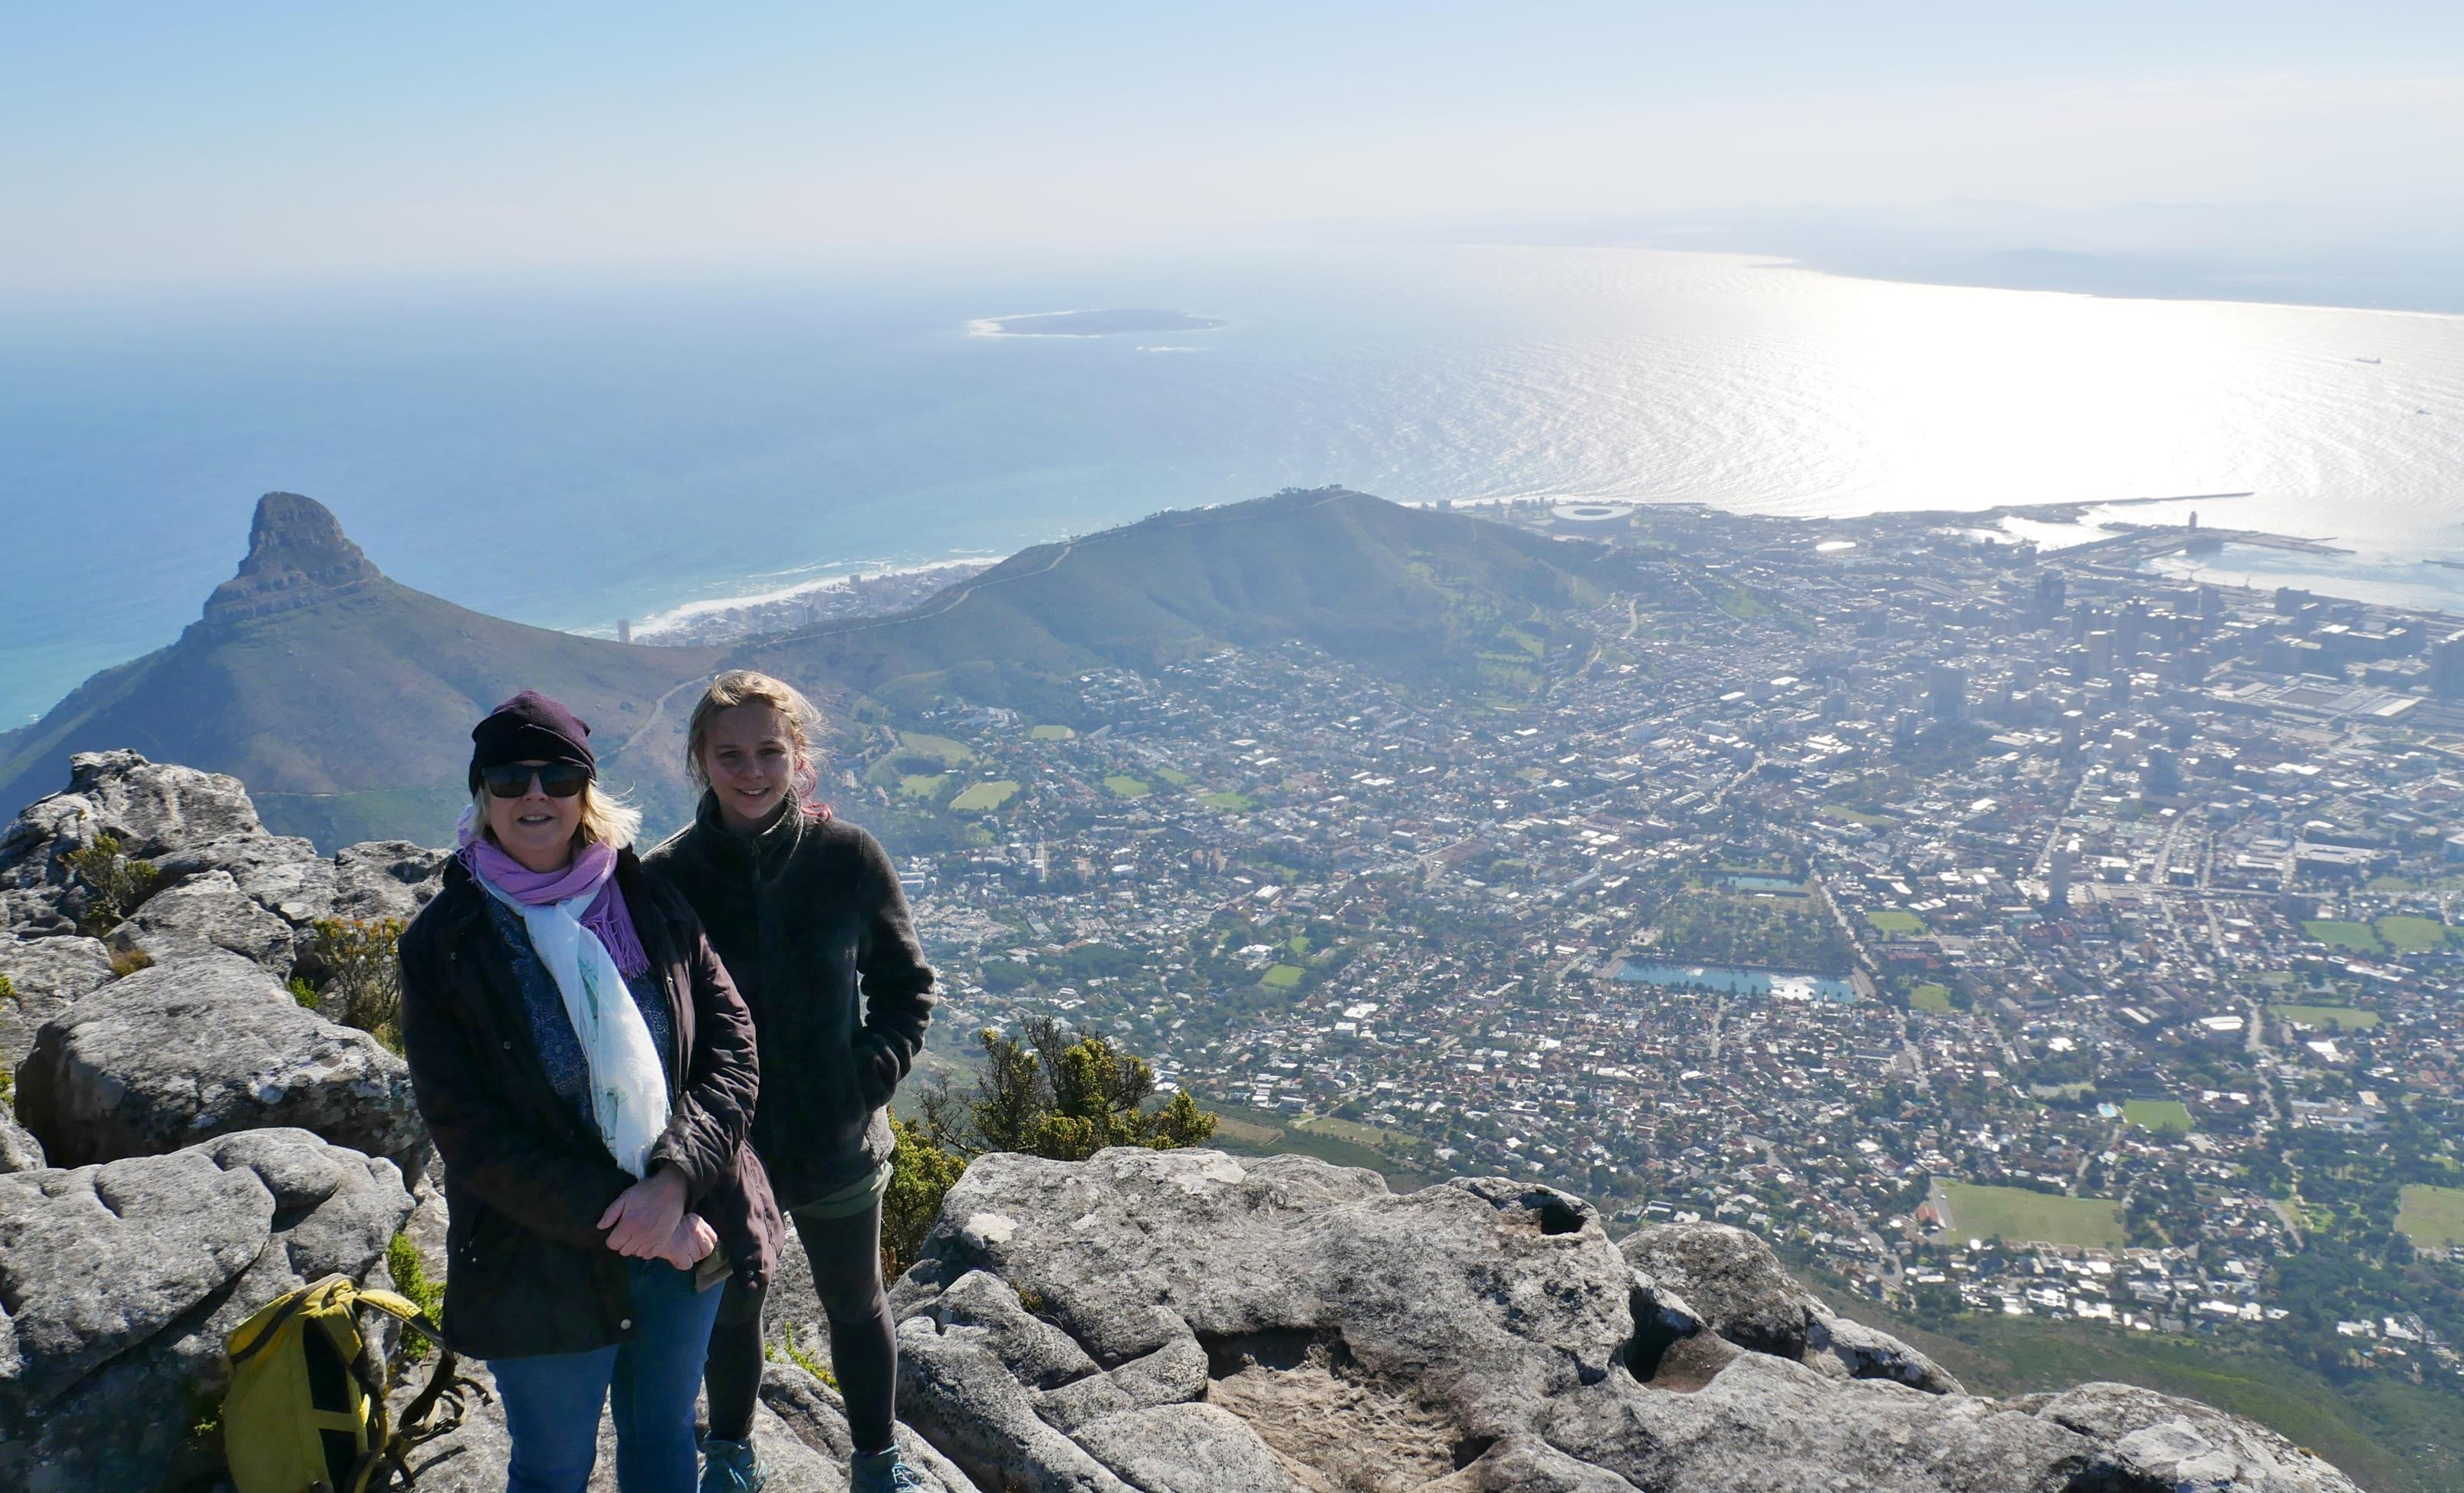 Cape Town from Table Mountain. In the background is Robben Island, where Nelson Mandela was imprisoned for 18 years